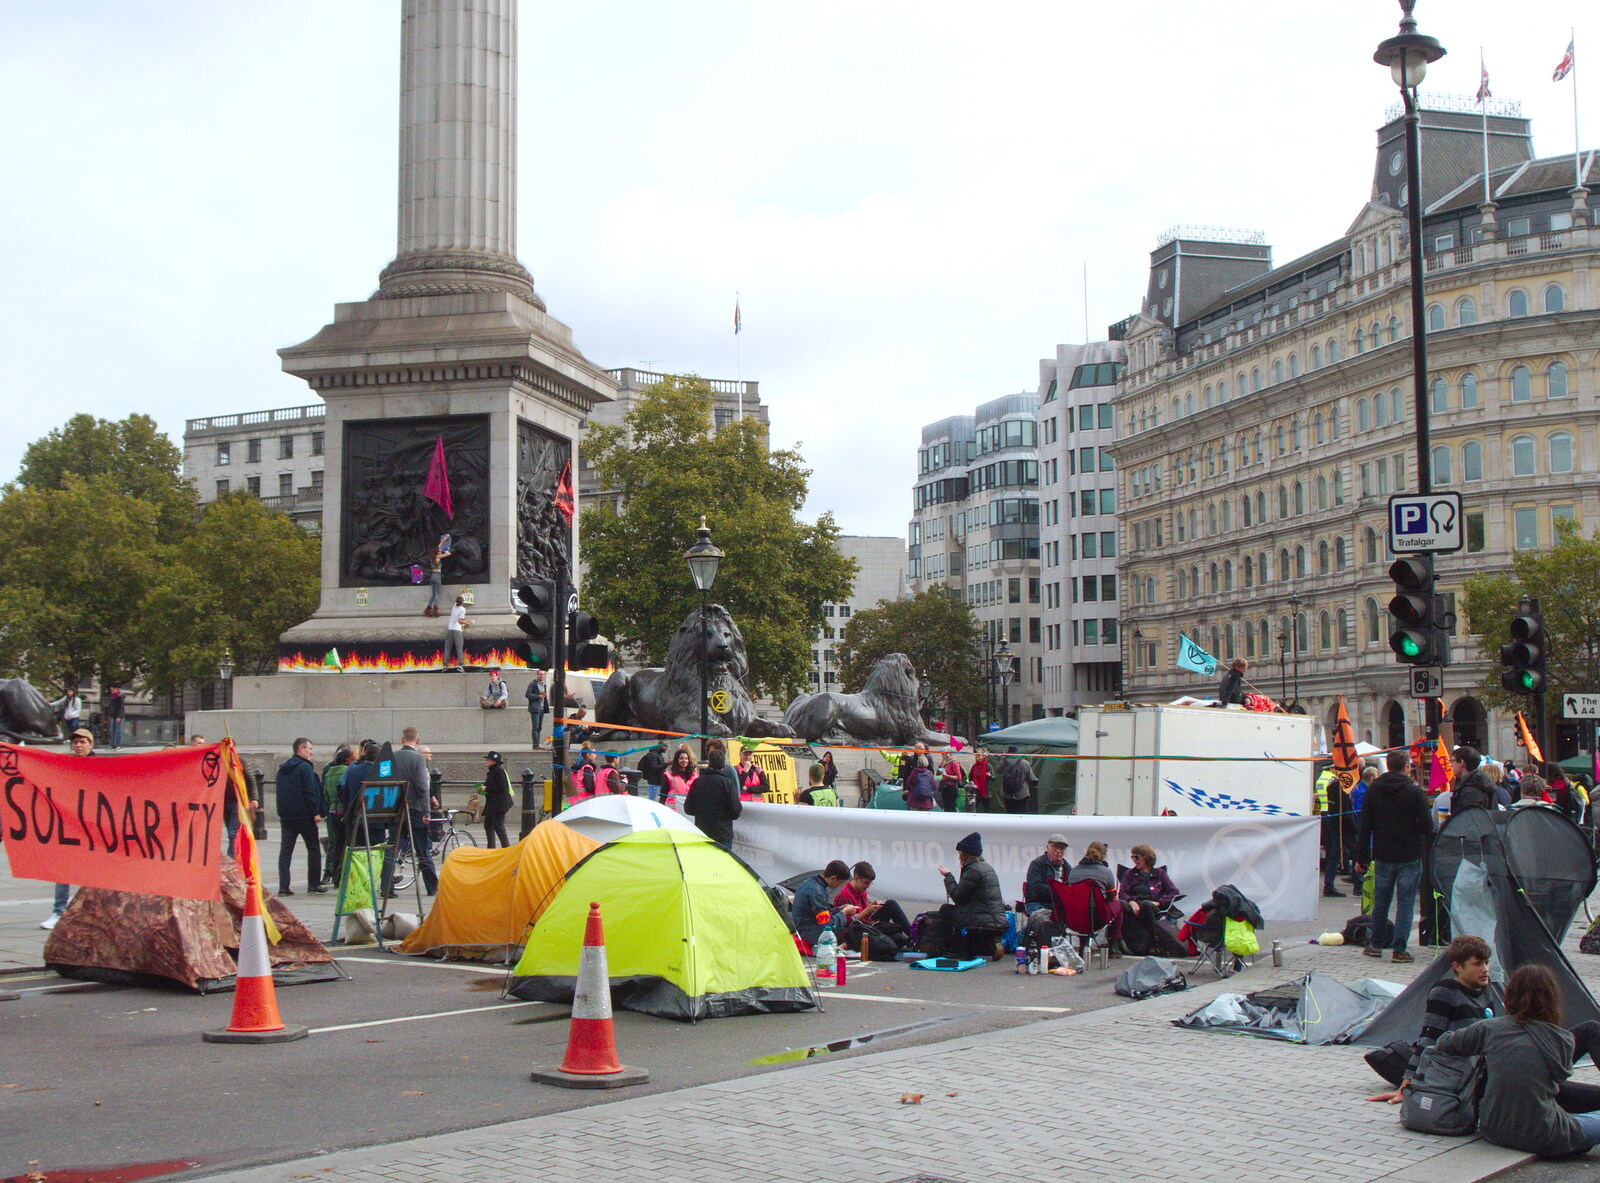 Nelson's column from The Extinction Rebellion Protest, Westminster, London - 9th October 2019